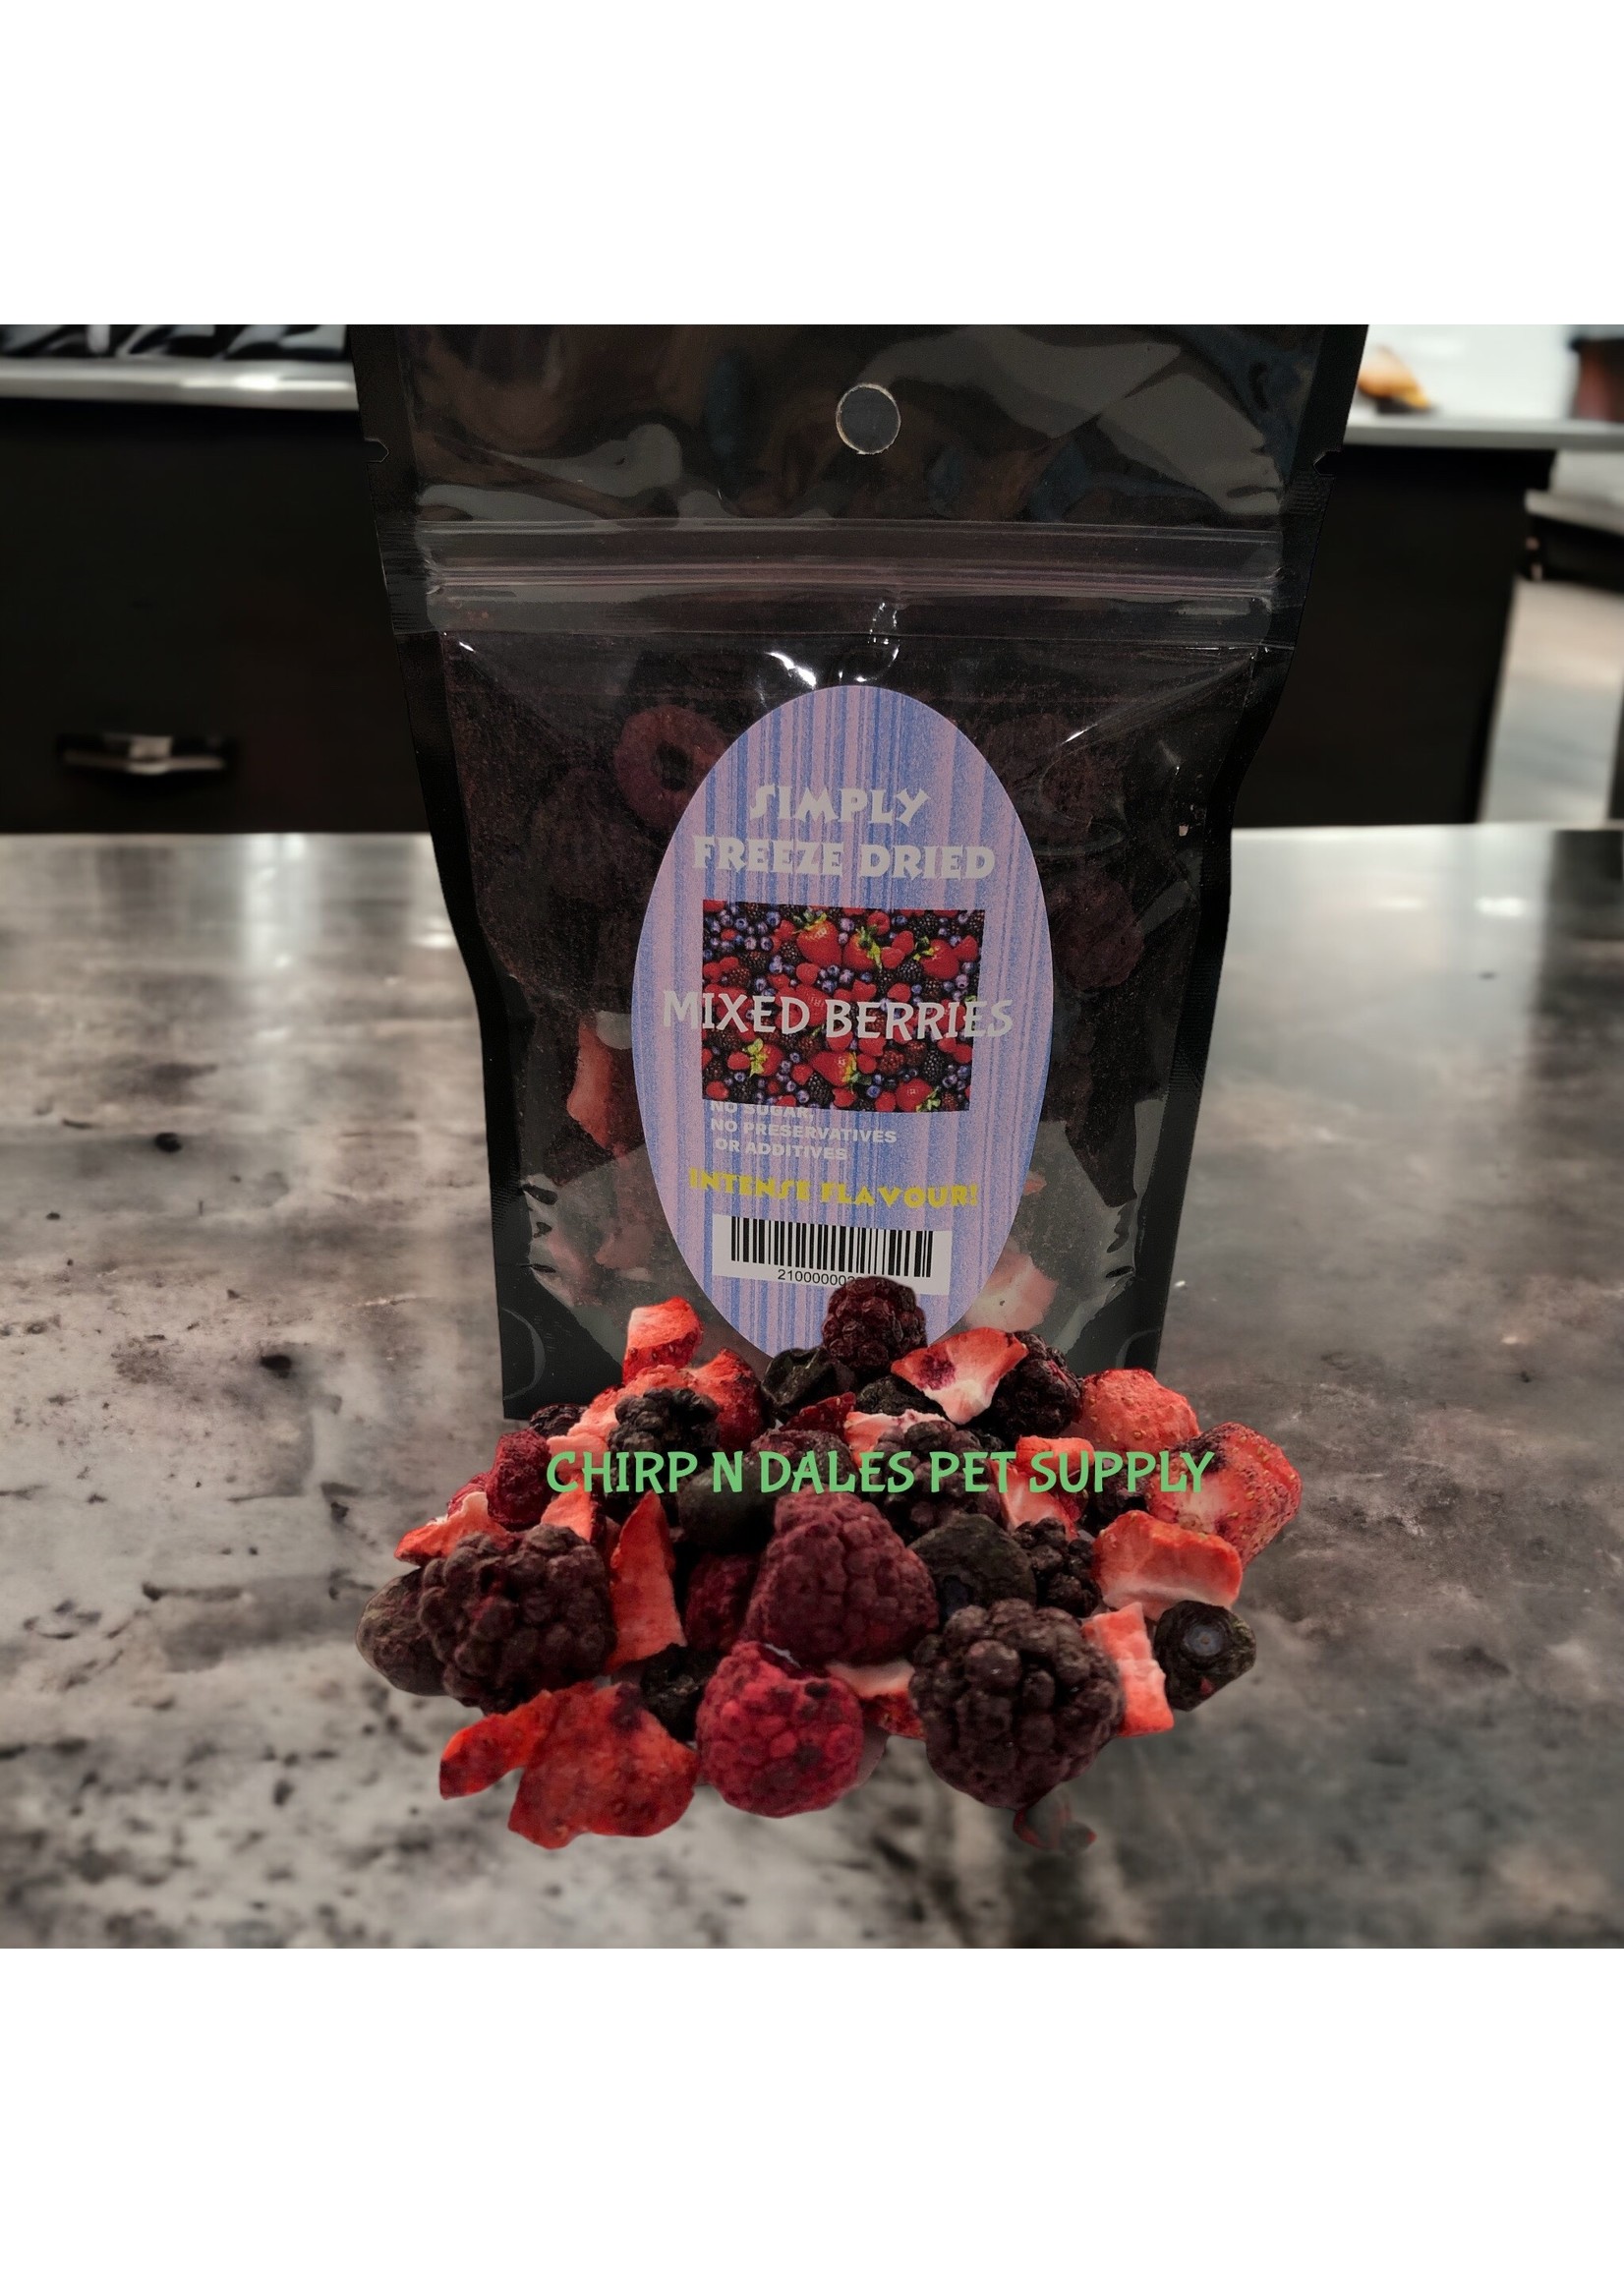 CND Freeze Dried Products Simply Freeze Dried Mixed Berries